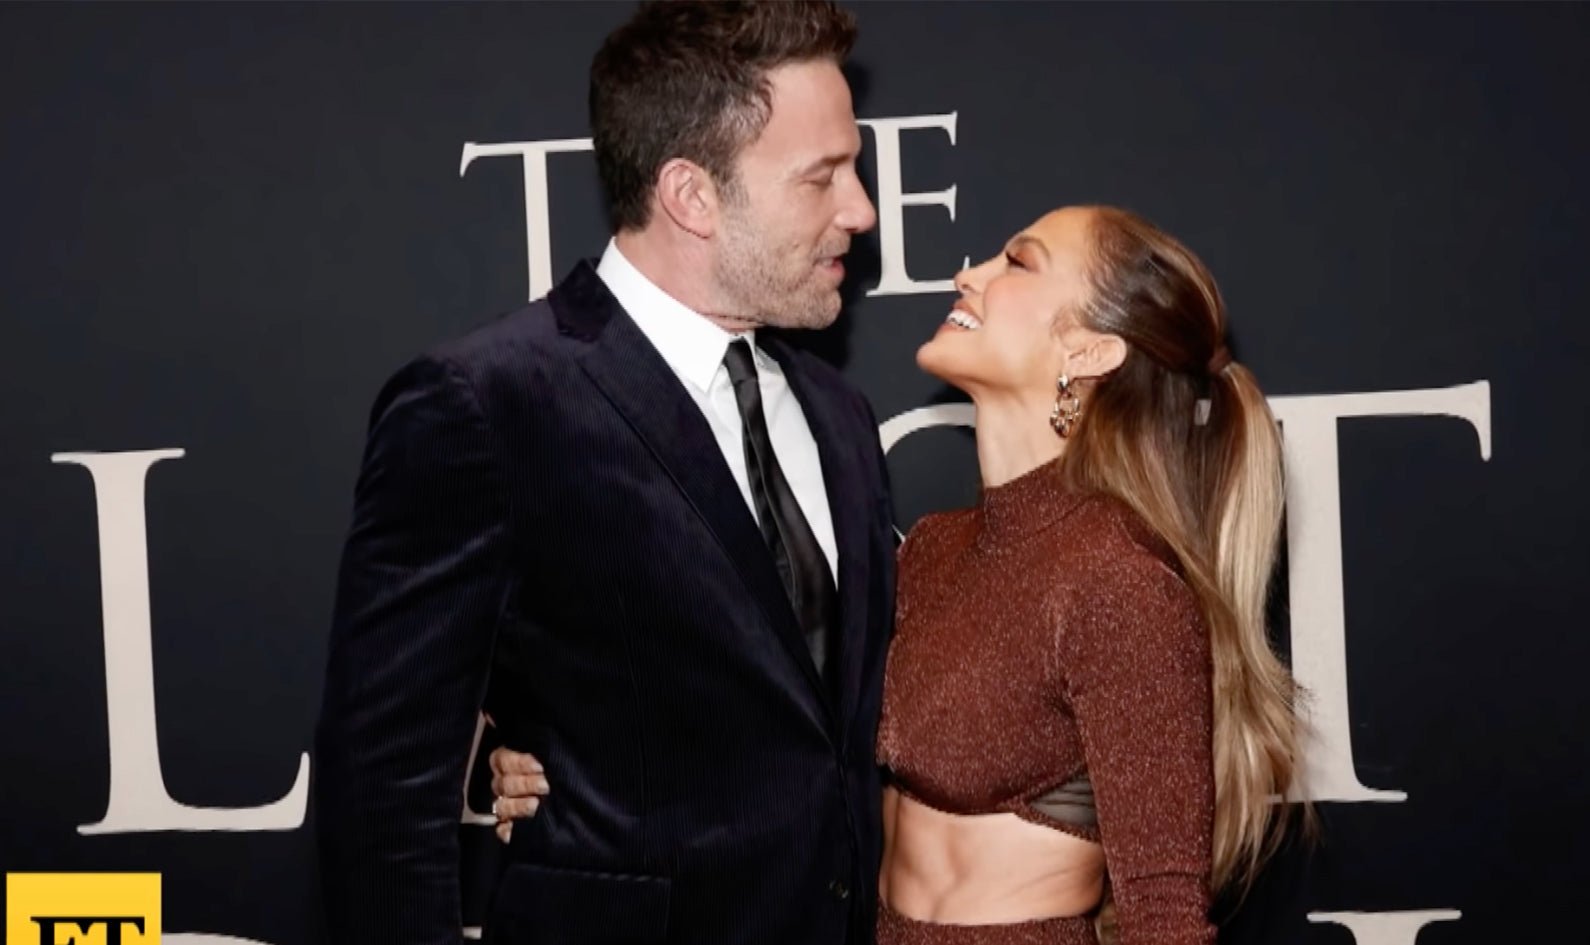 The Hollywood Couple of the Moment: Jennifer Lopez and Ben Affleck Kissed on the Red Carpet - DSF Antique Jewelry